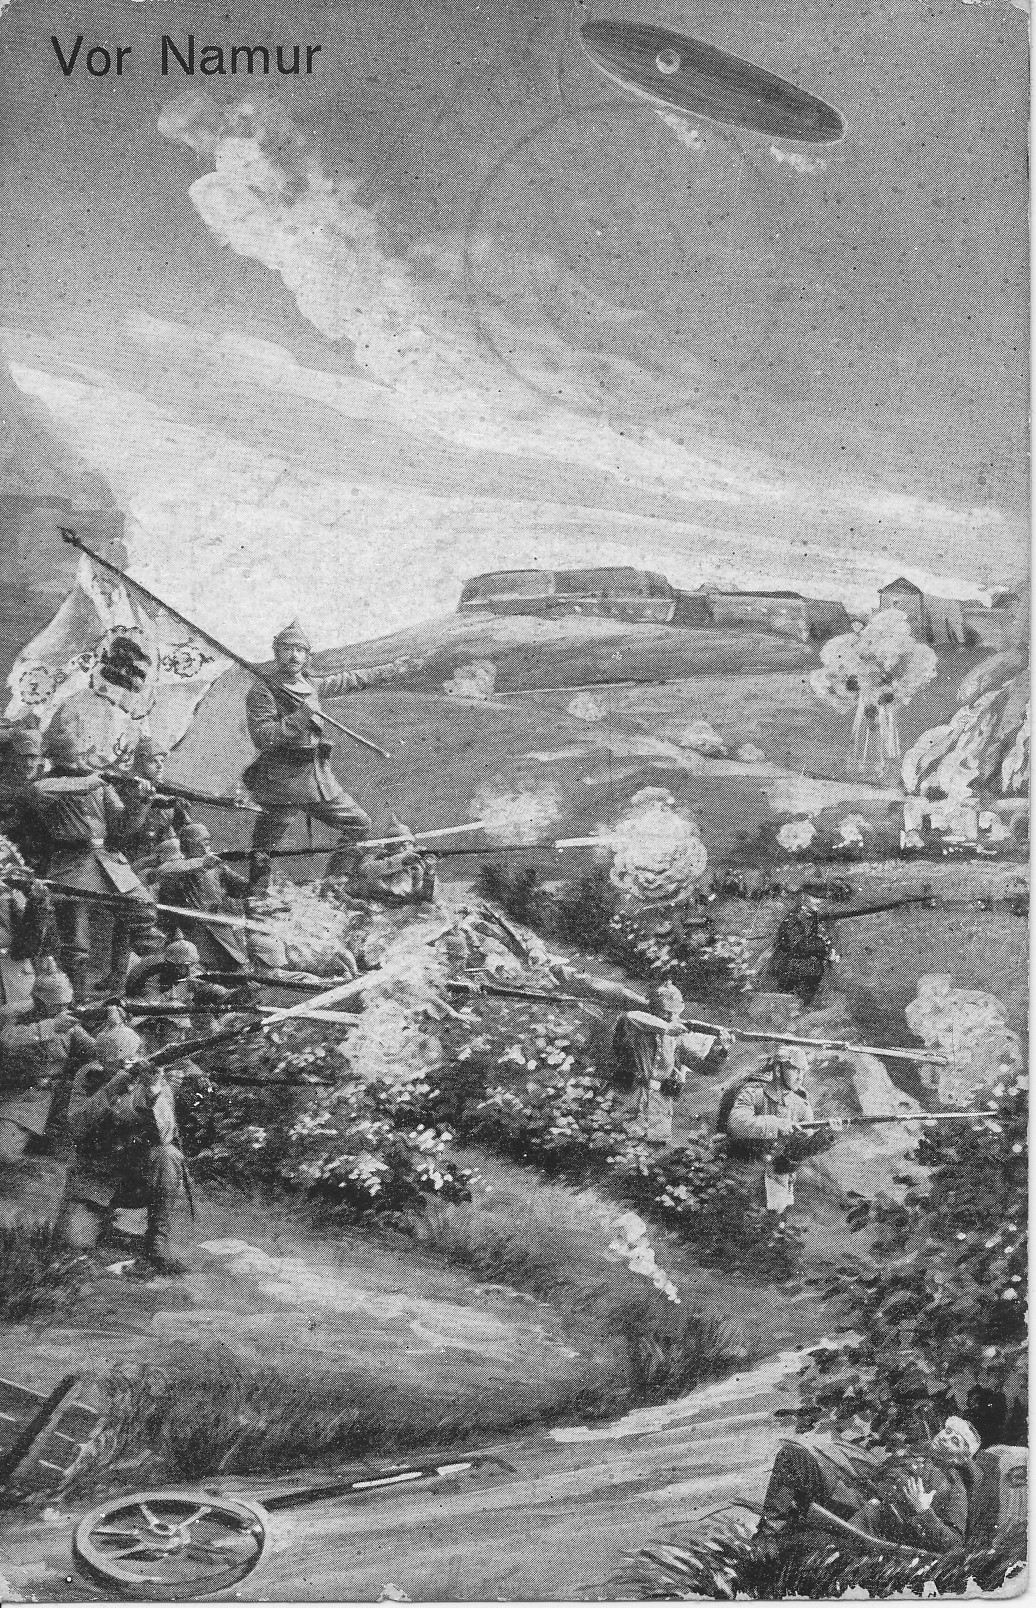 German forces — a standard bearer, and troops in picklehaube firing rifles, below a hilltop fortress. A Zeppelin is overhead, and a wounded Belgian soldier is in the foreground. Gray-tone.